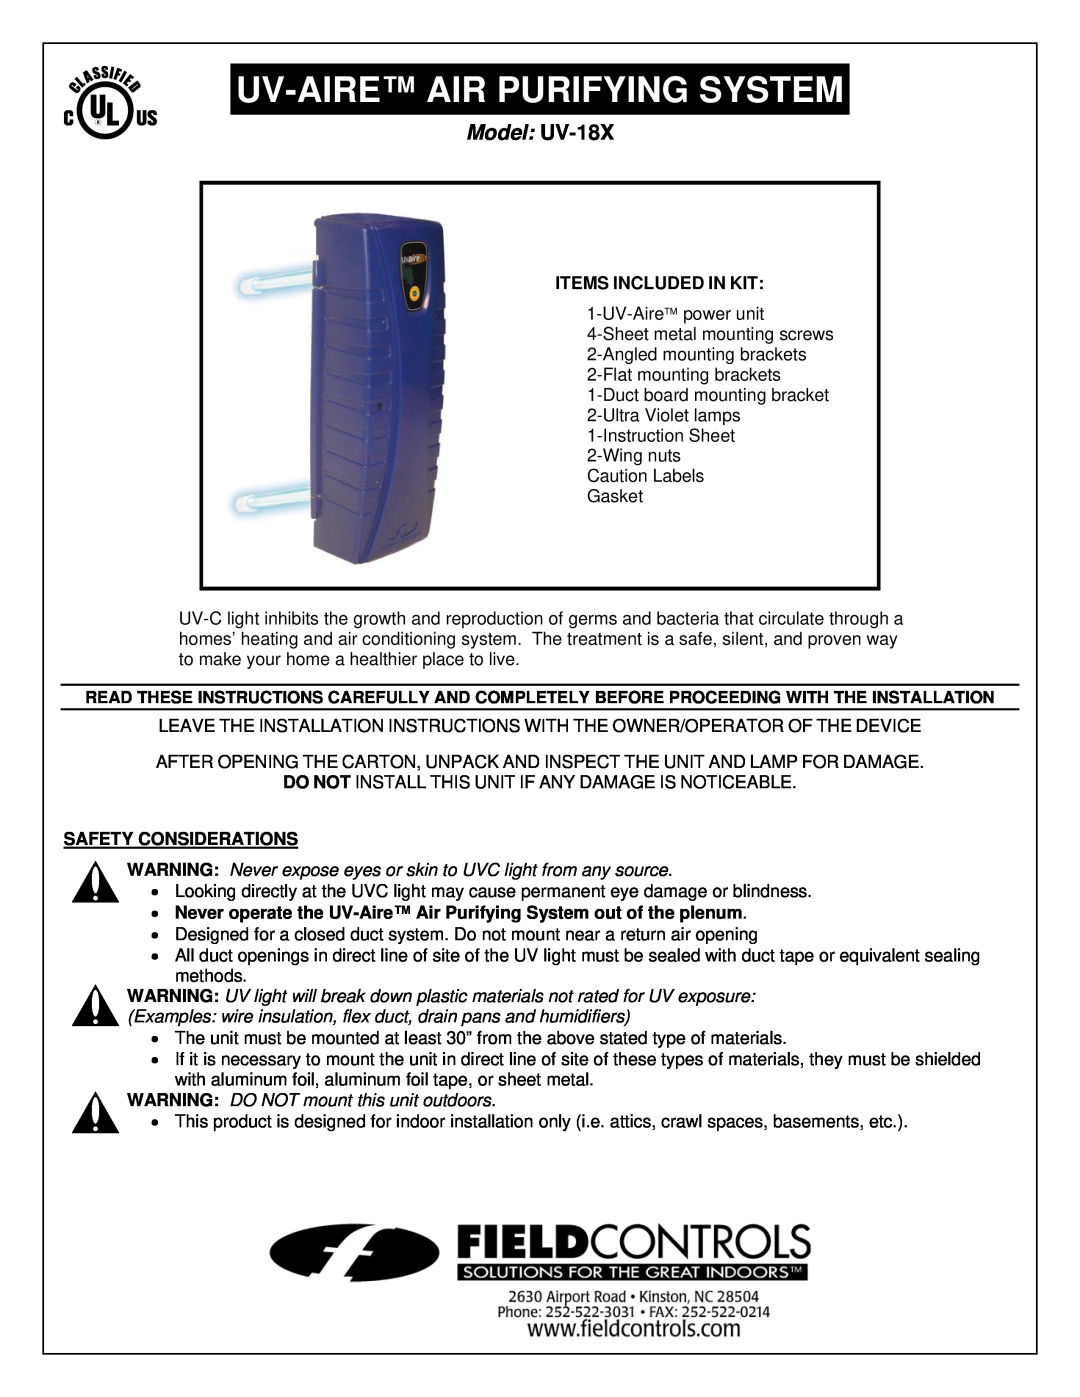 Field Controls UV-18X installation instructions Items Included In Kit, Safety Considerations, Uv-Aireair Purifying System 